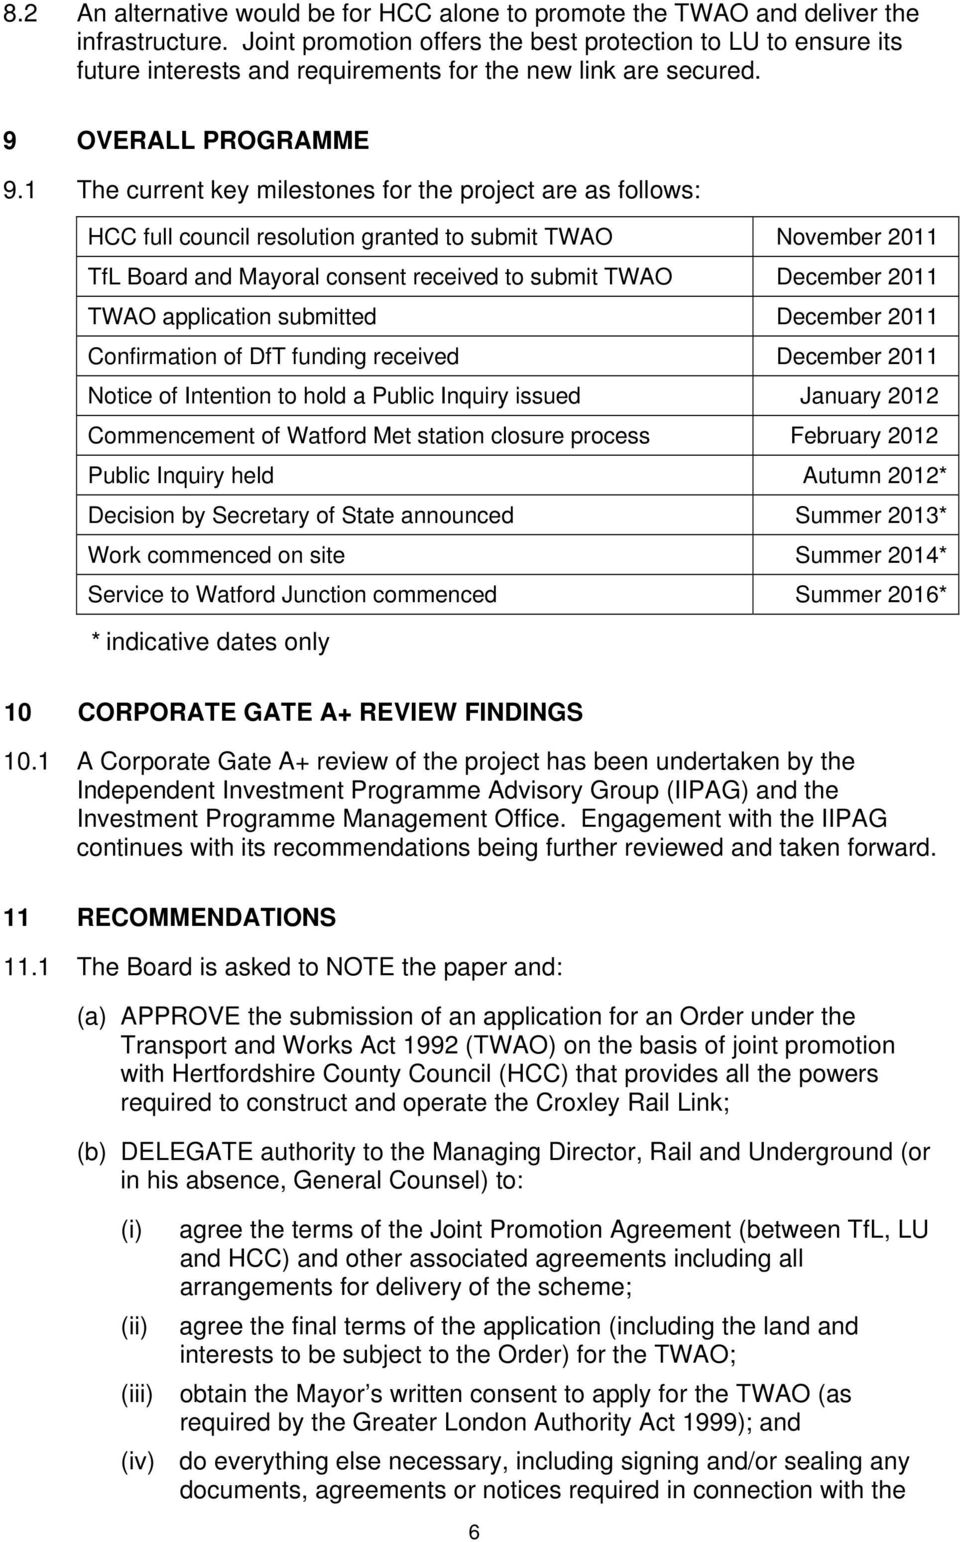 1 The current key milestones for the project are as follows: HCC full council resolution granted to submit TWAO November 2011 TfL Board and Mayoral consent received to submit TWAO December 2011 TWAO